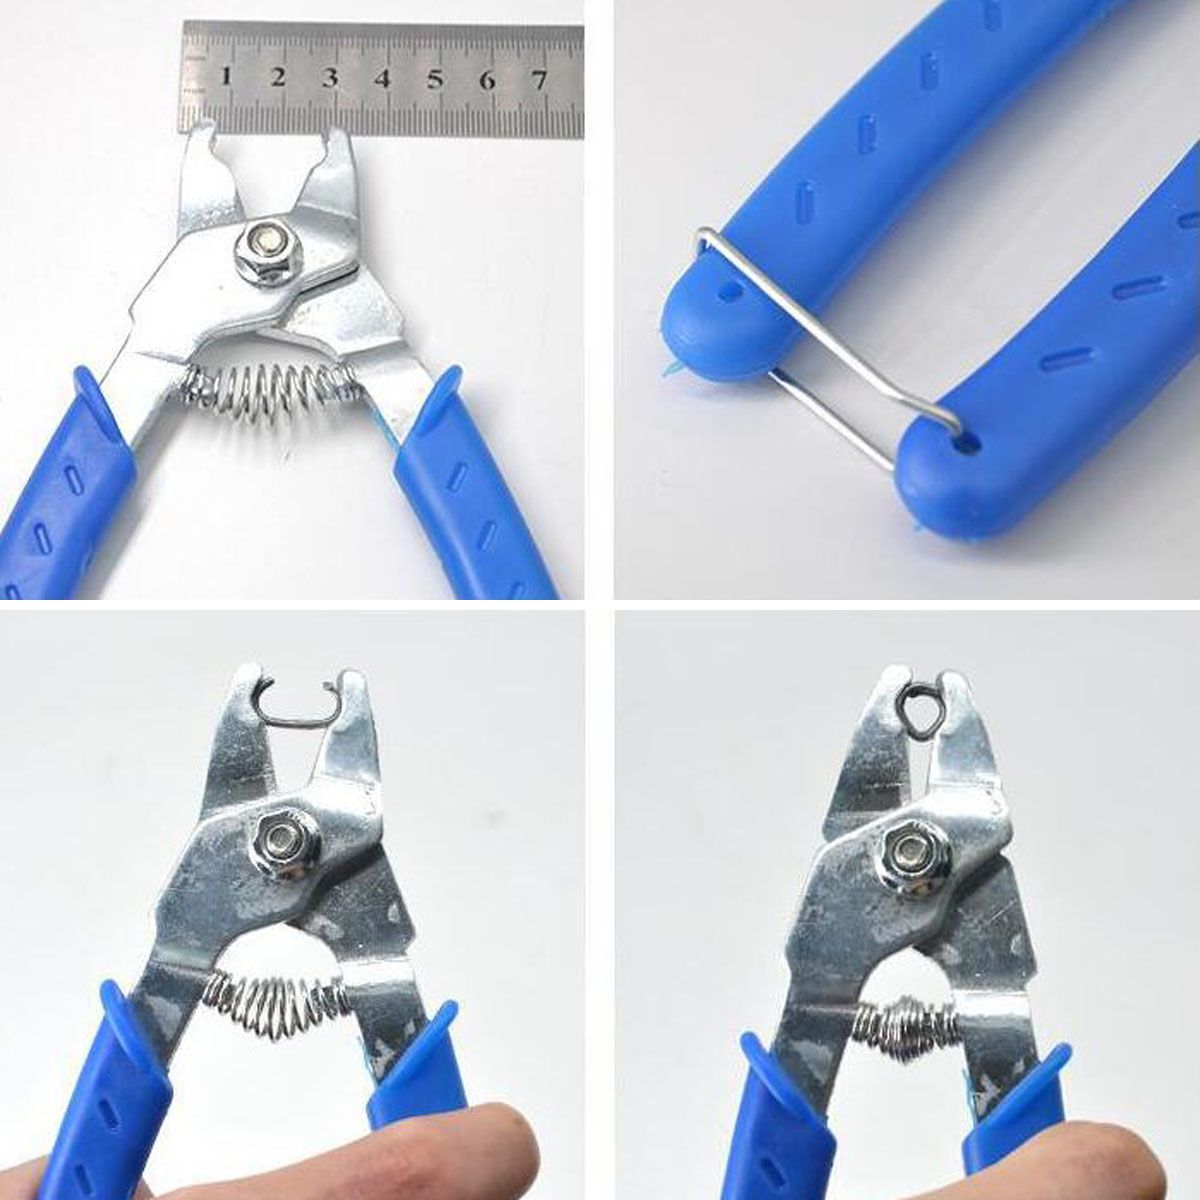 2500Pcs-Hog-Rings-C-Type-Staples-Clips-Rings-Steel-Wire-Fencing-For-Pet-Cage-Plier-1337876